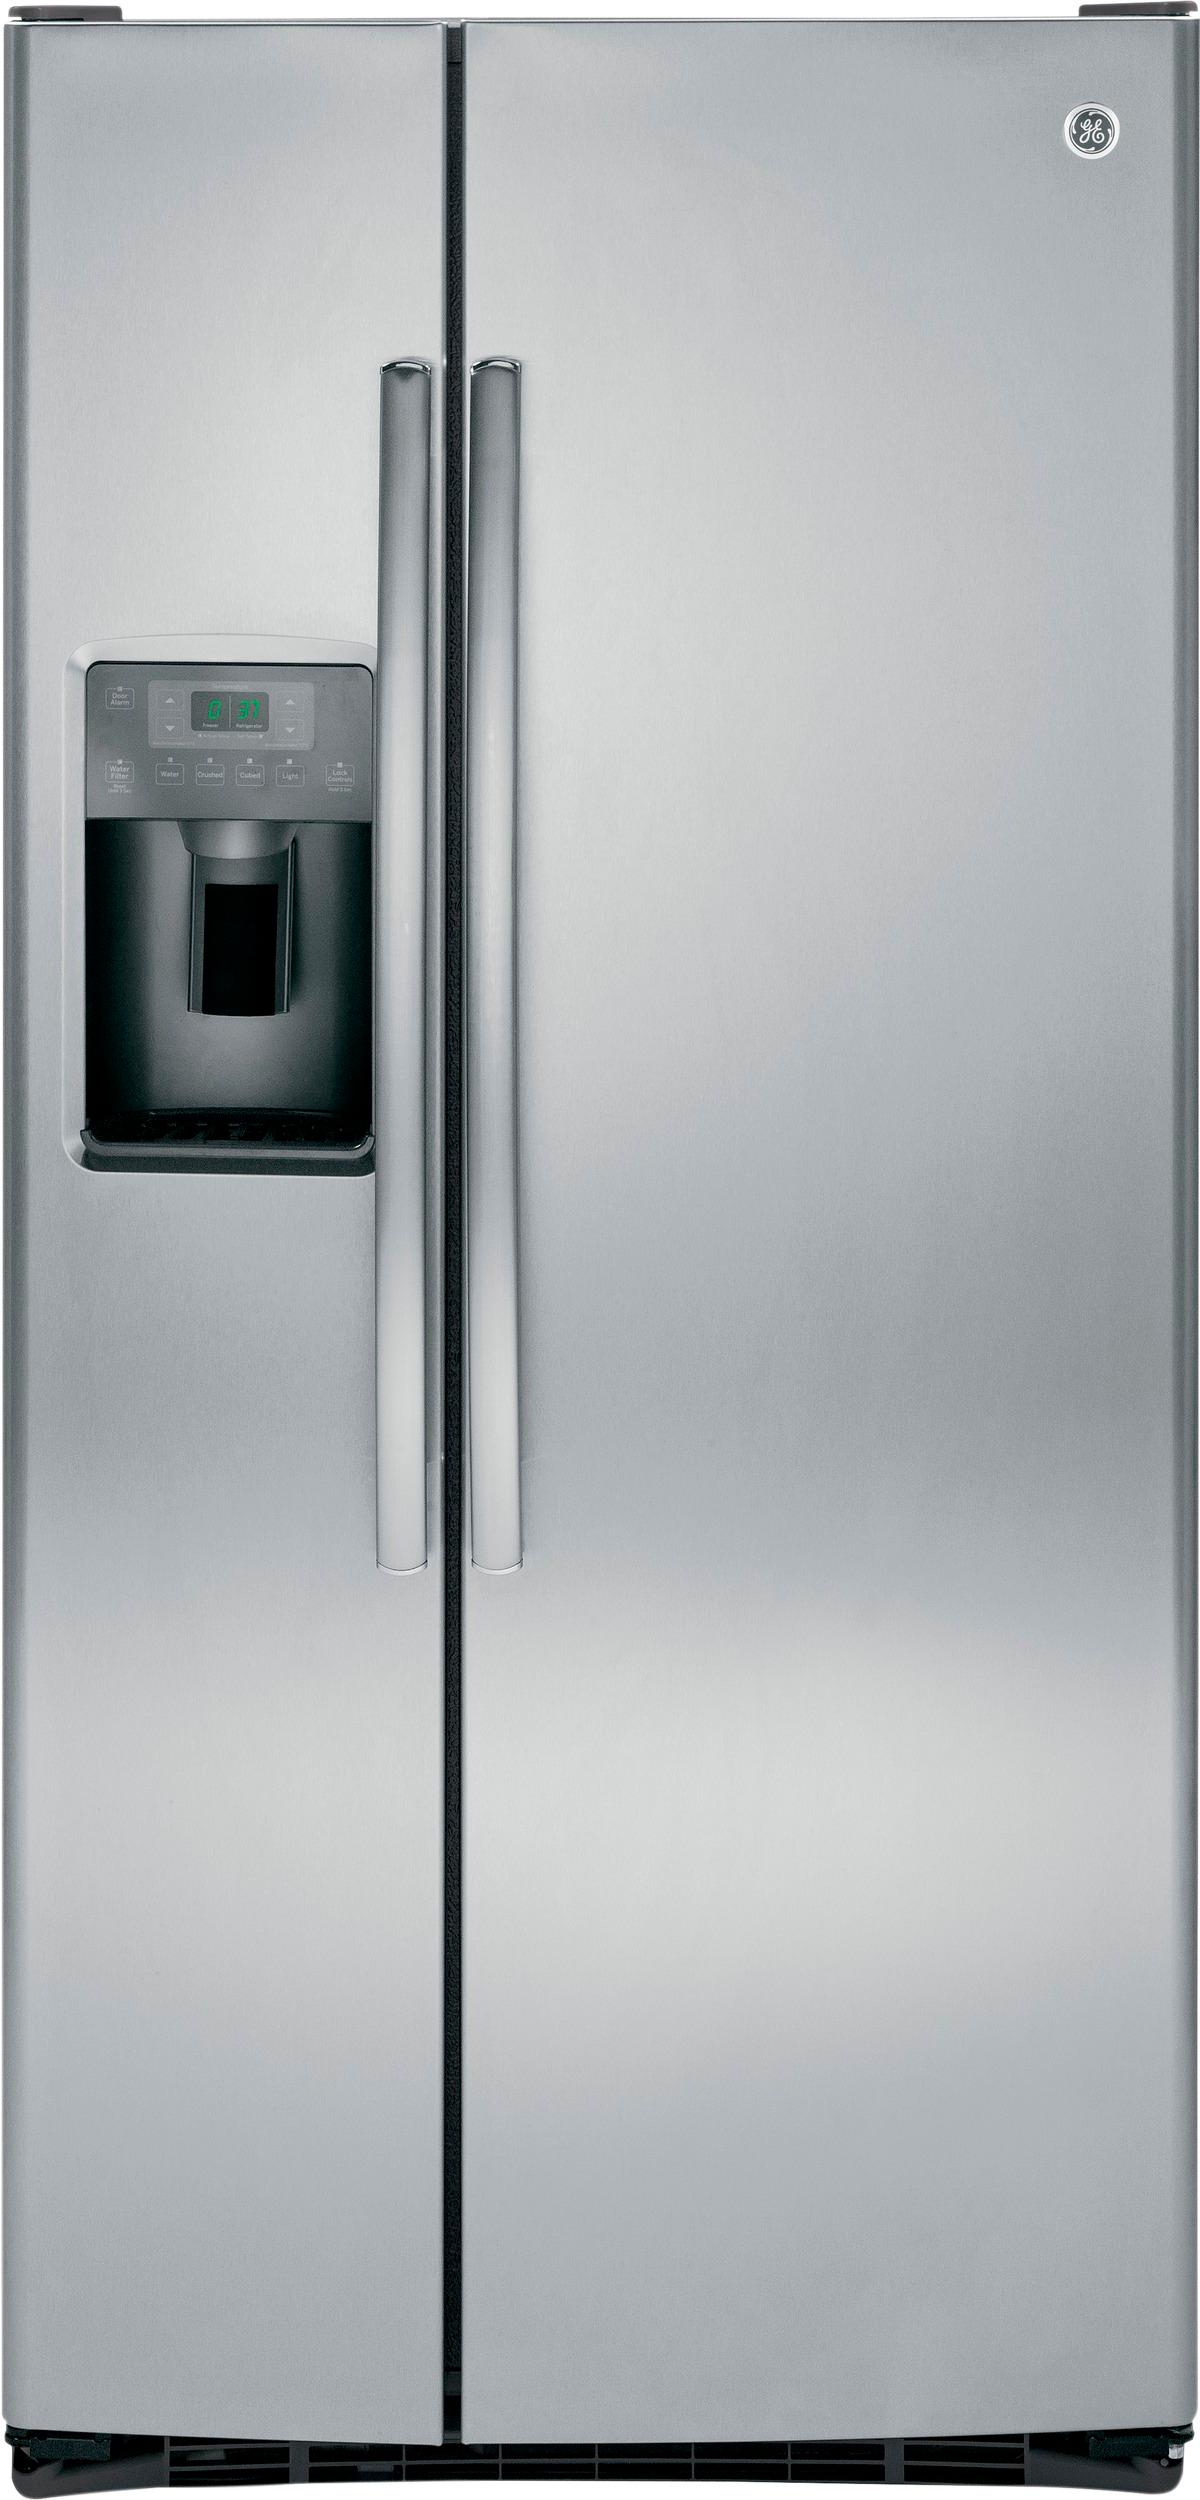 GE Ft Side-by-Side Refrigerator With Ice Maker (Stainless Steel) ENERGY ...